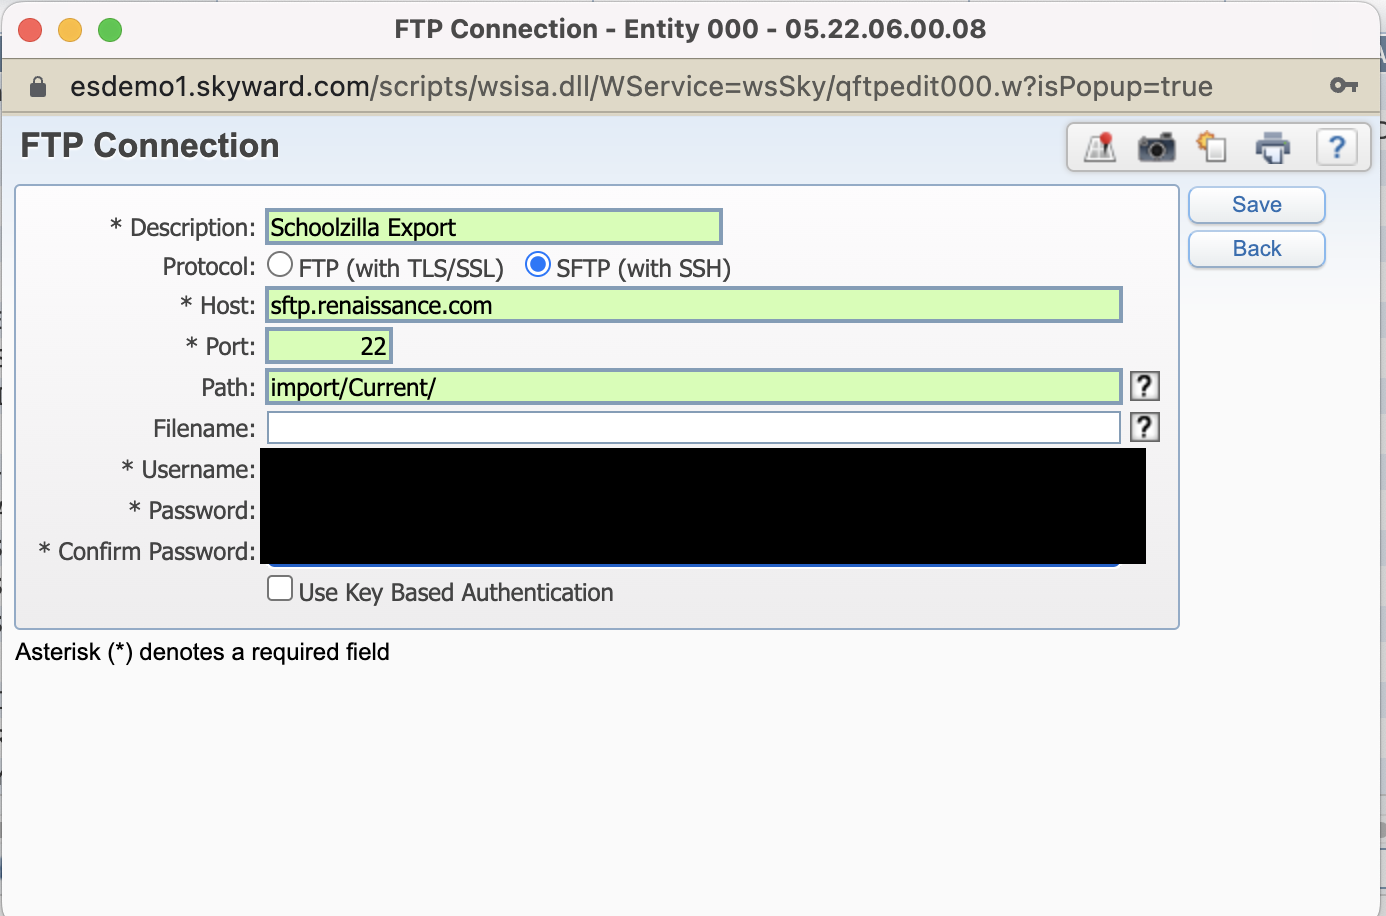 the FTP Connection window and the Save button